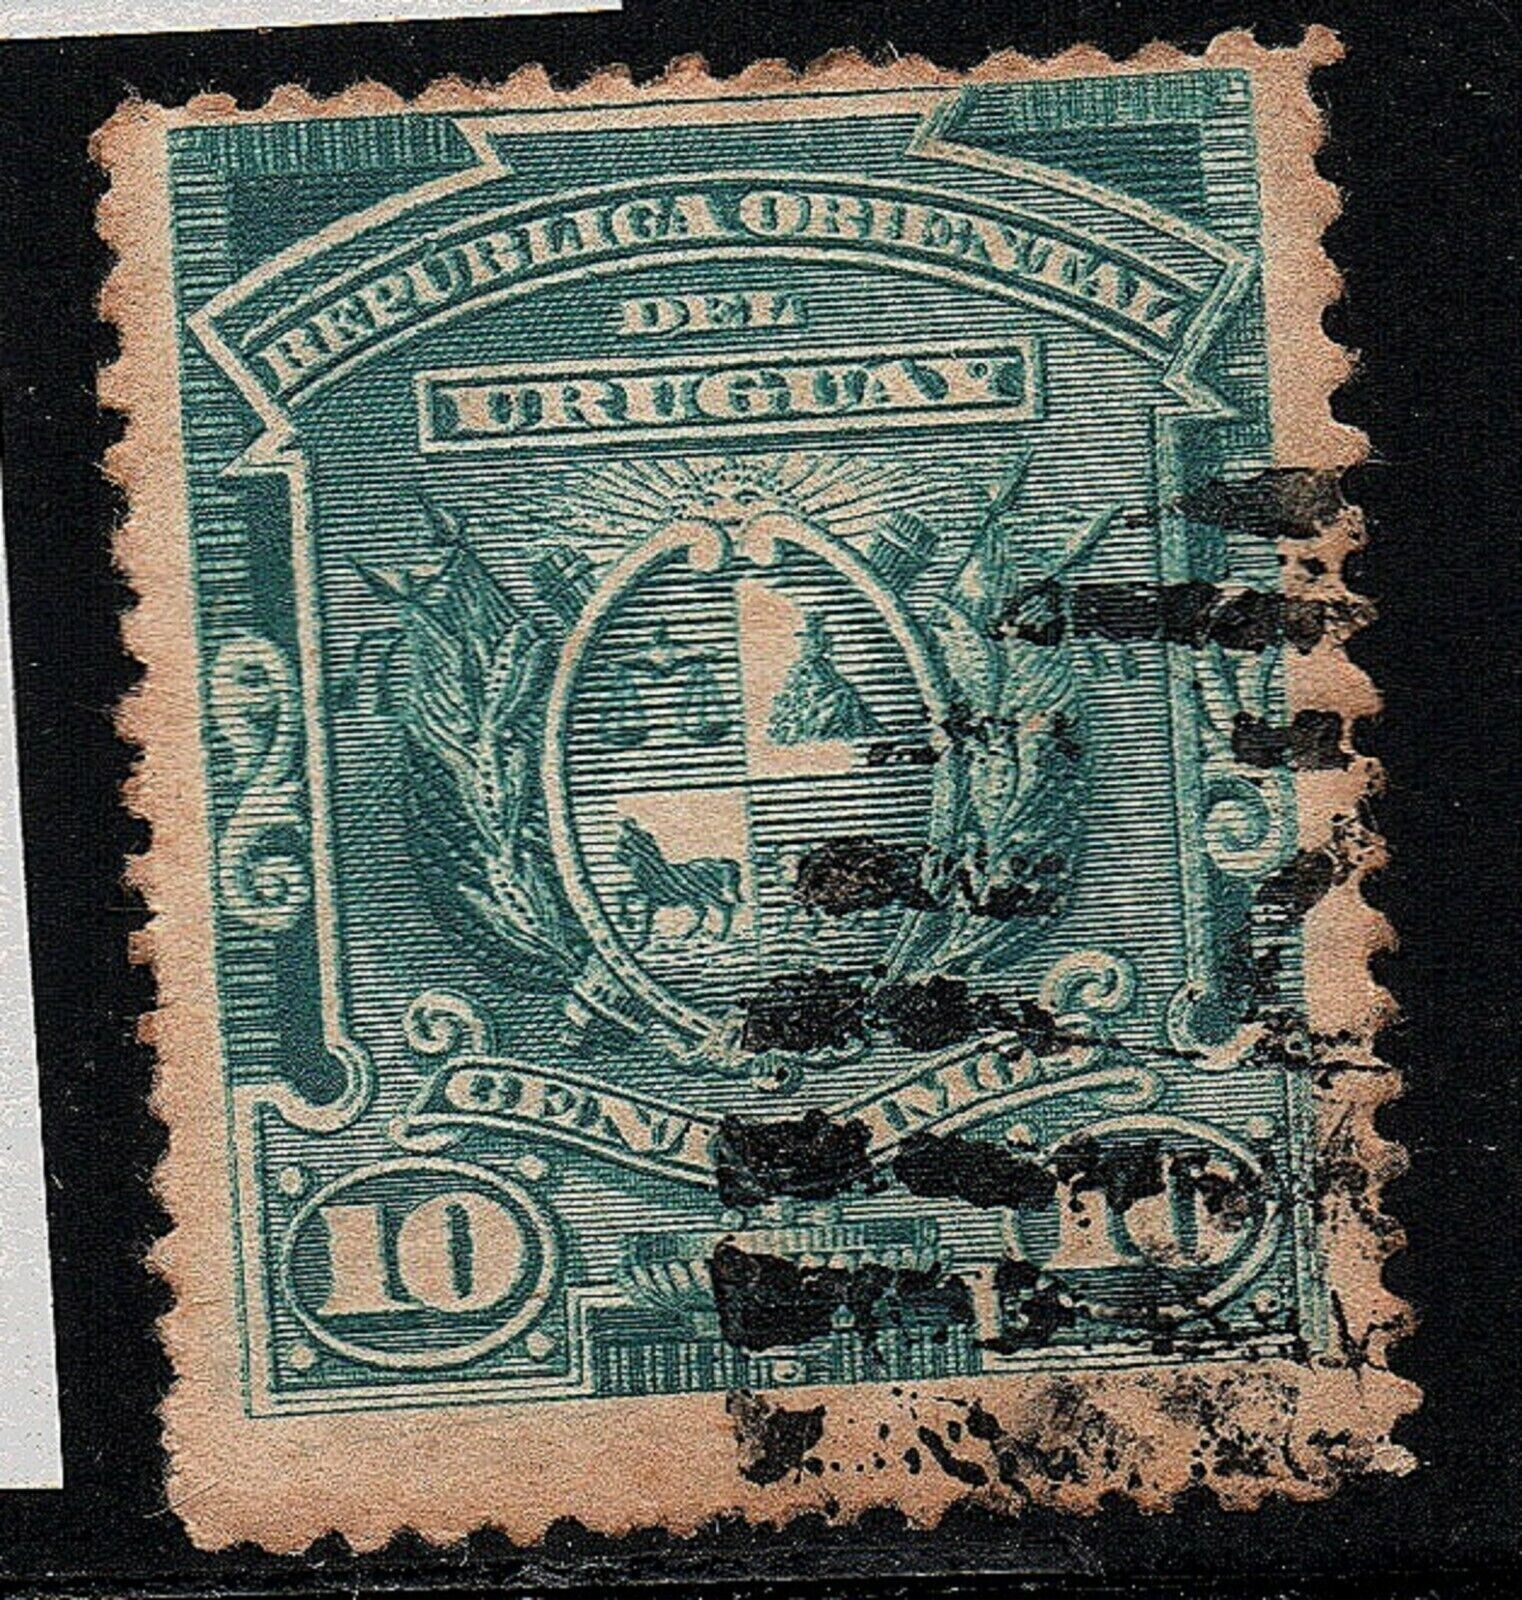 Primary image for Uruguay #84 very strong  Re-entry variety Coat of arms apealing used stamp